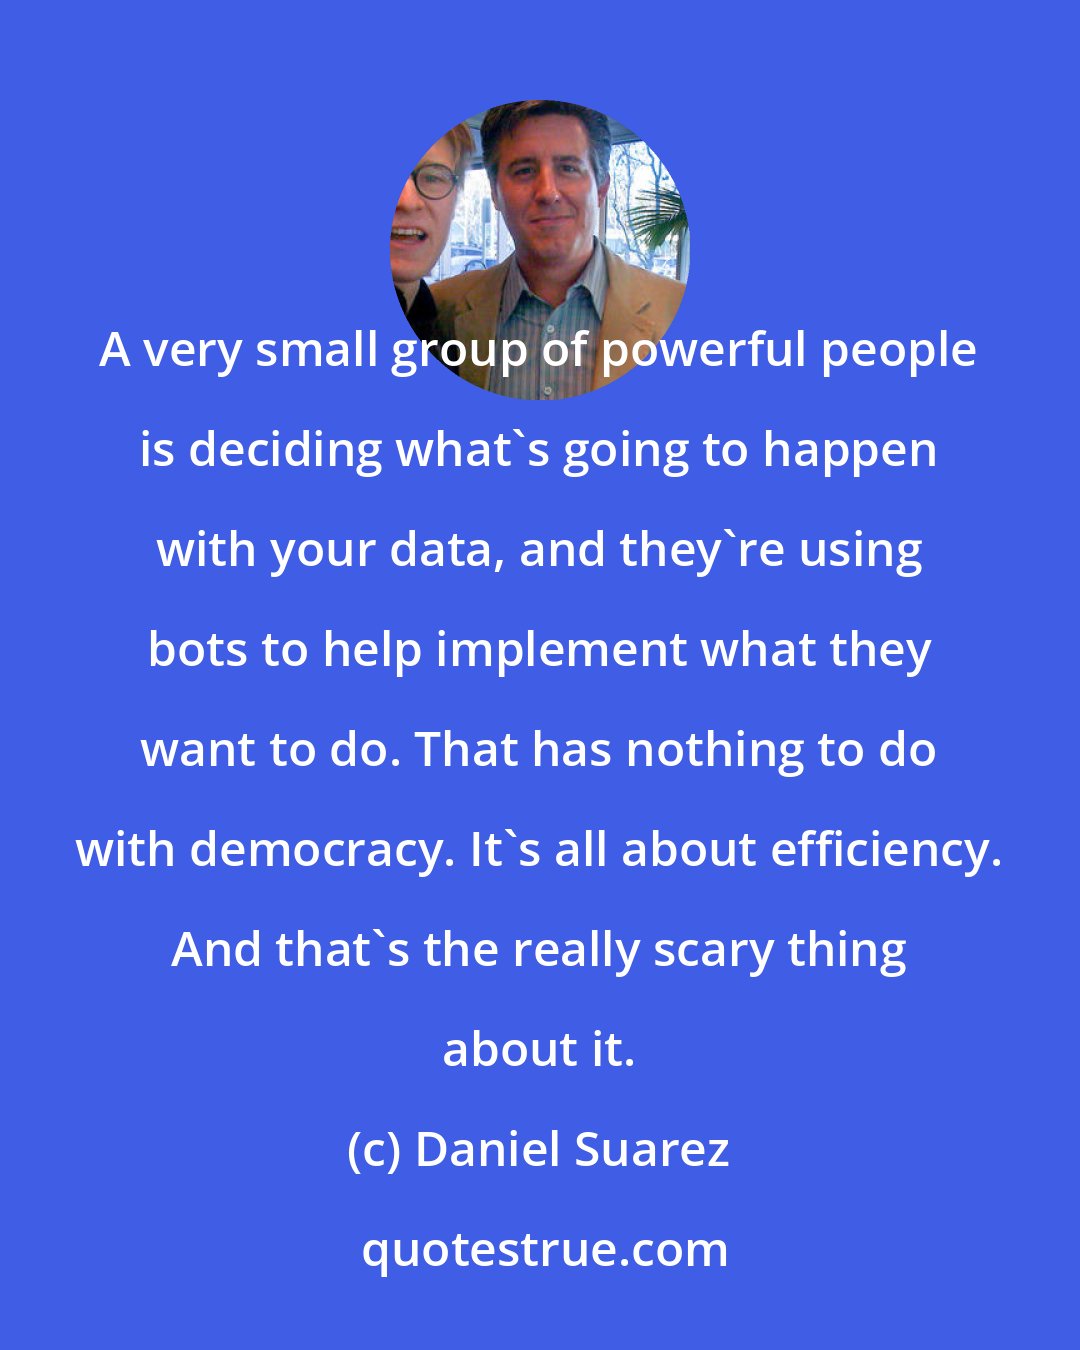 Daniel Suarez: A very small group of powerful people is deciding what's going to happen with your data, and they're using bots to help implement what they want to do. That has nothing to do with democracy. It's all about efficiency. And that's the really scary thing about it.